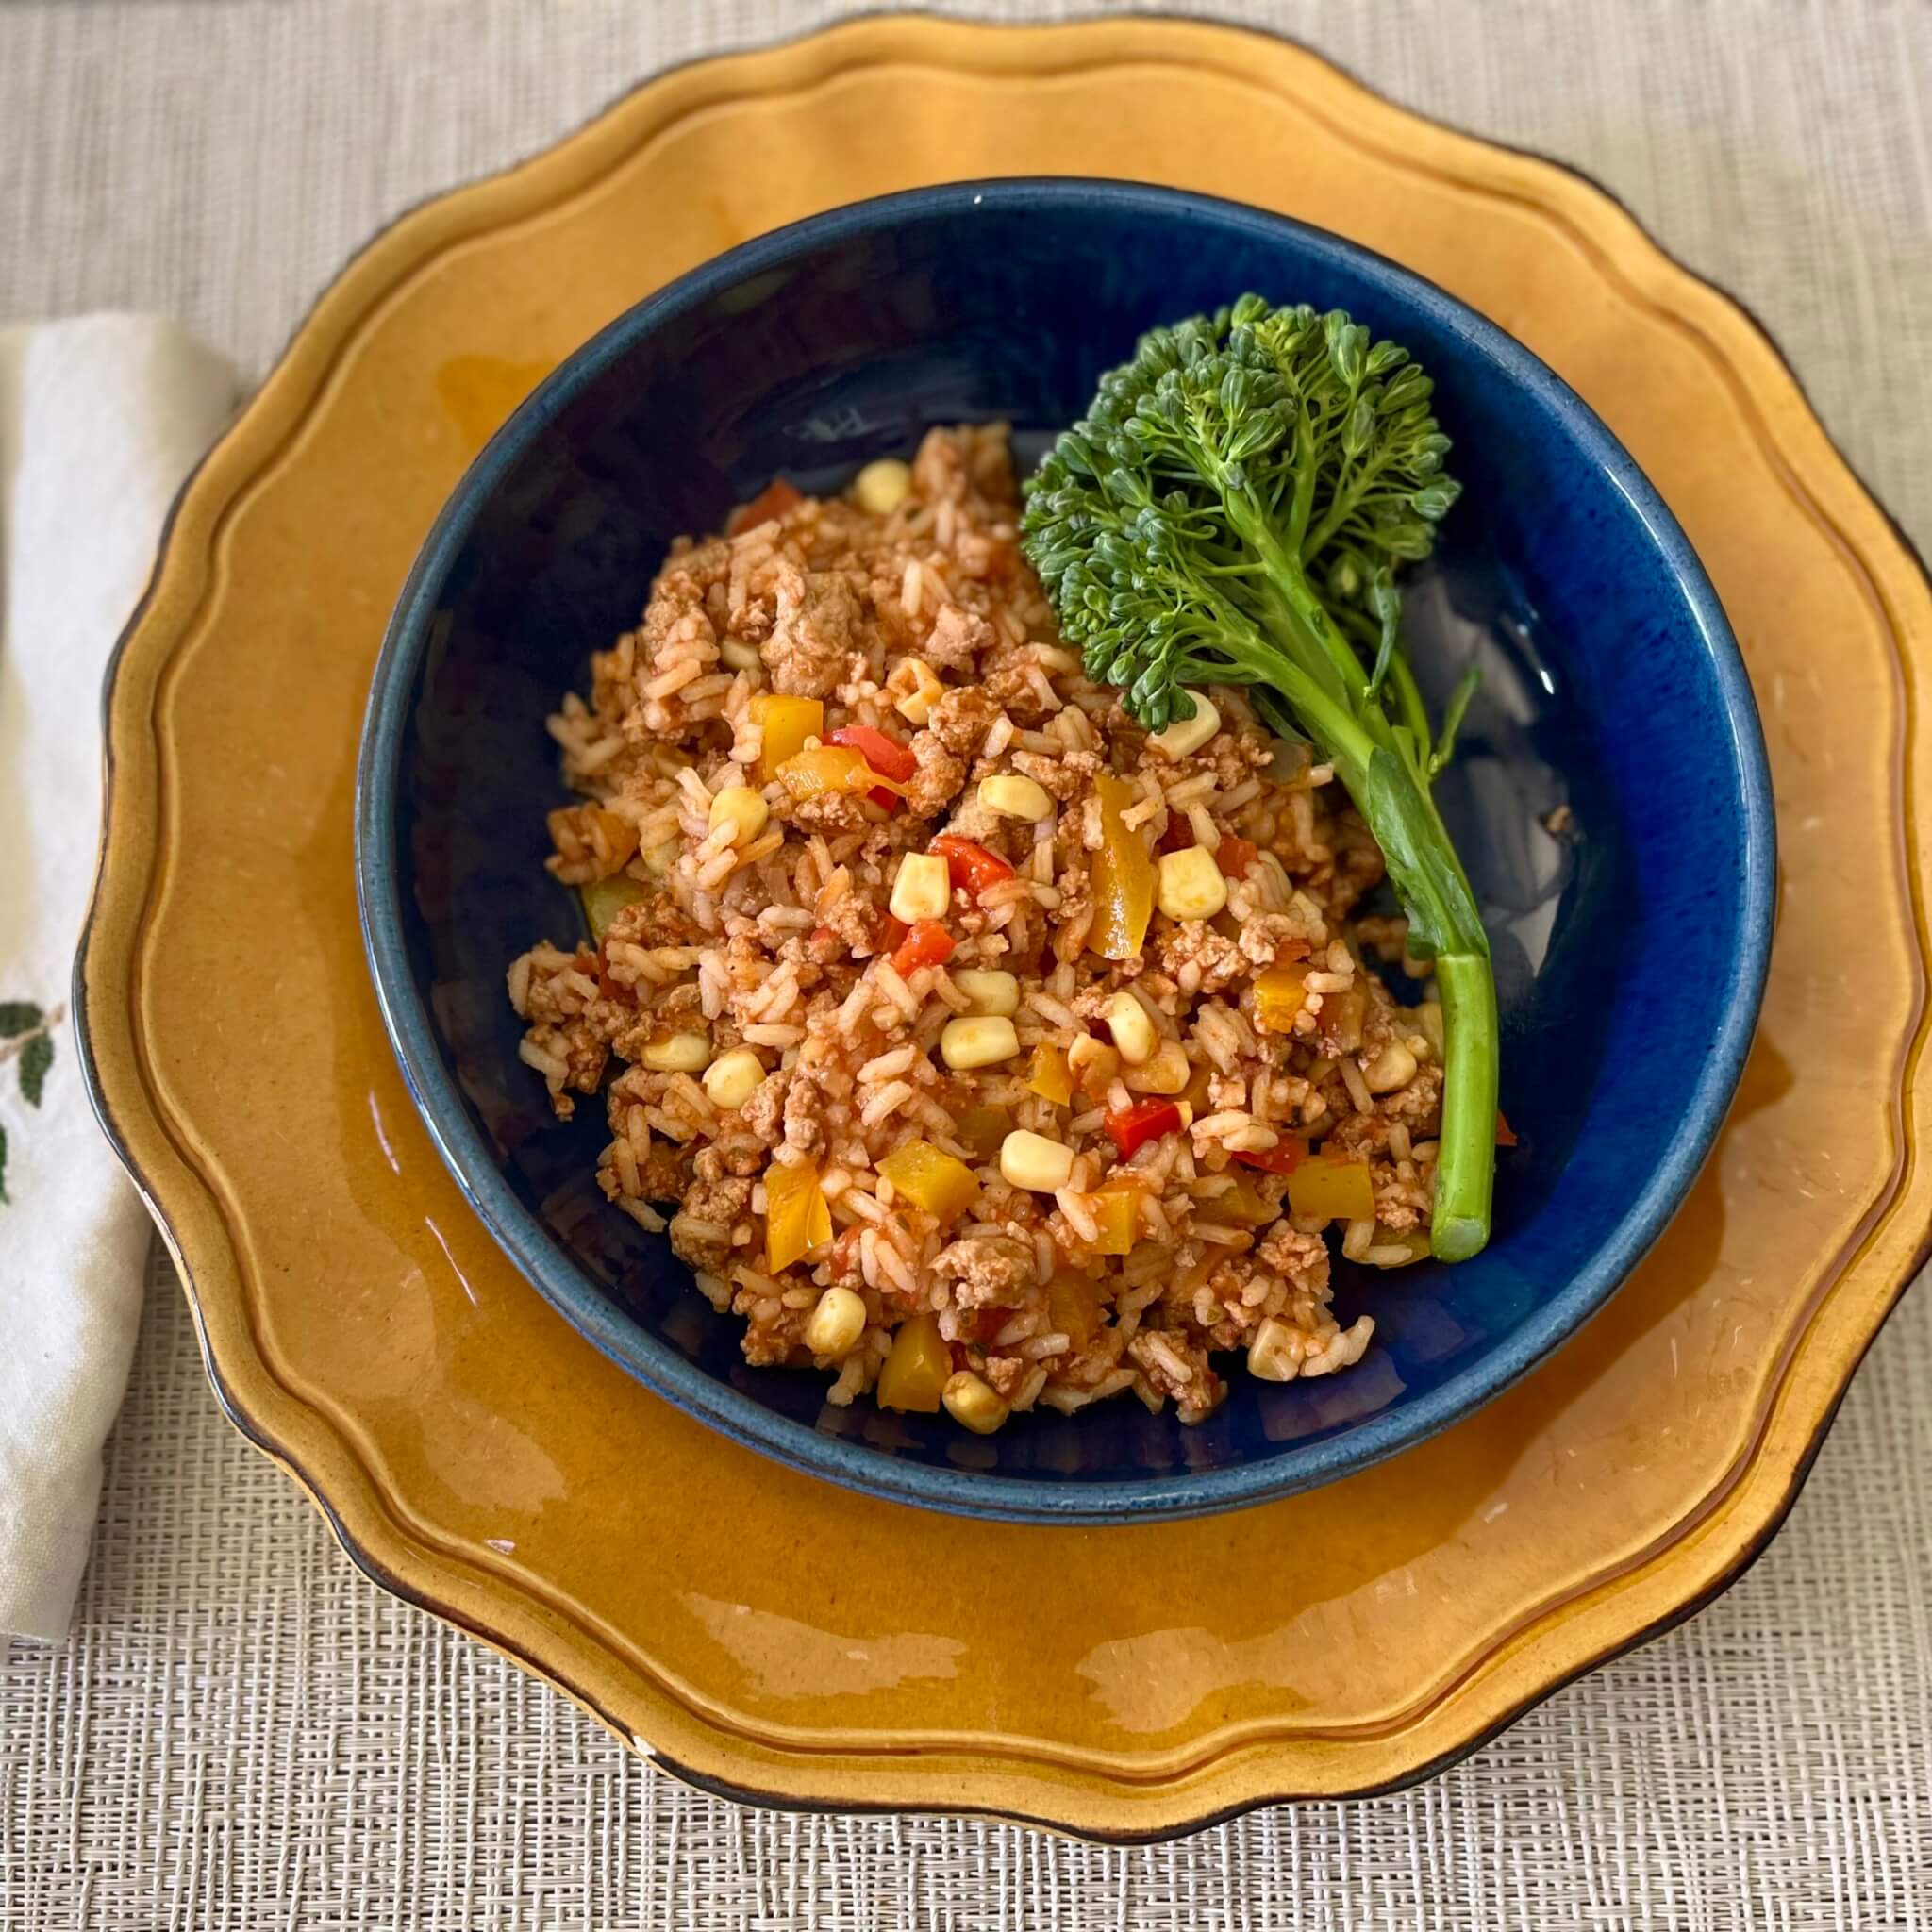 A blue bowl containing a mixture of ground turkey, peppers, corn and salsa, resting on an orange plate